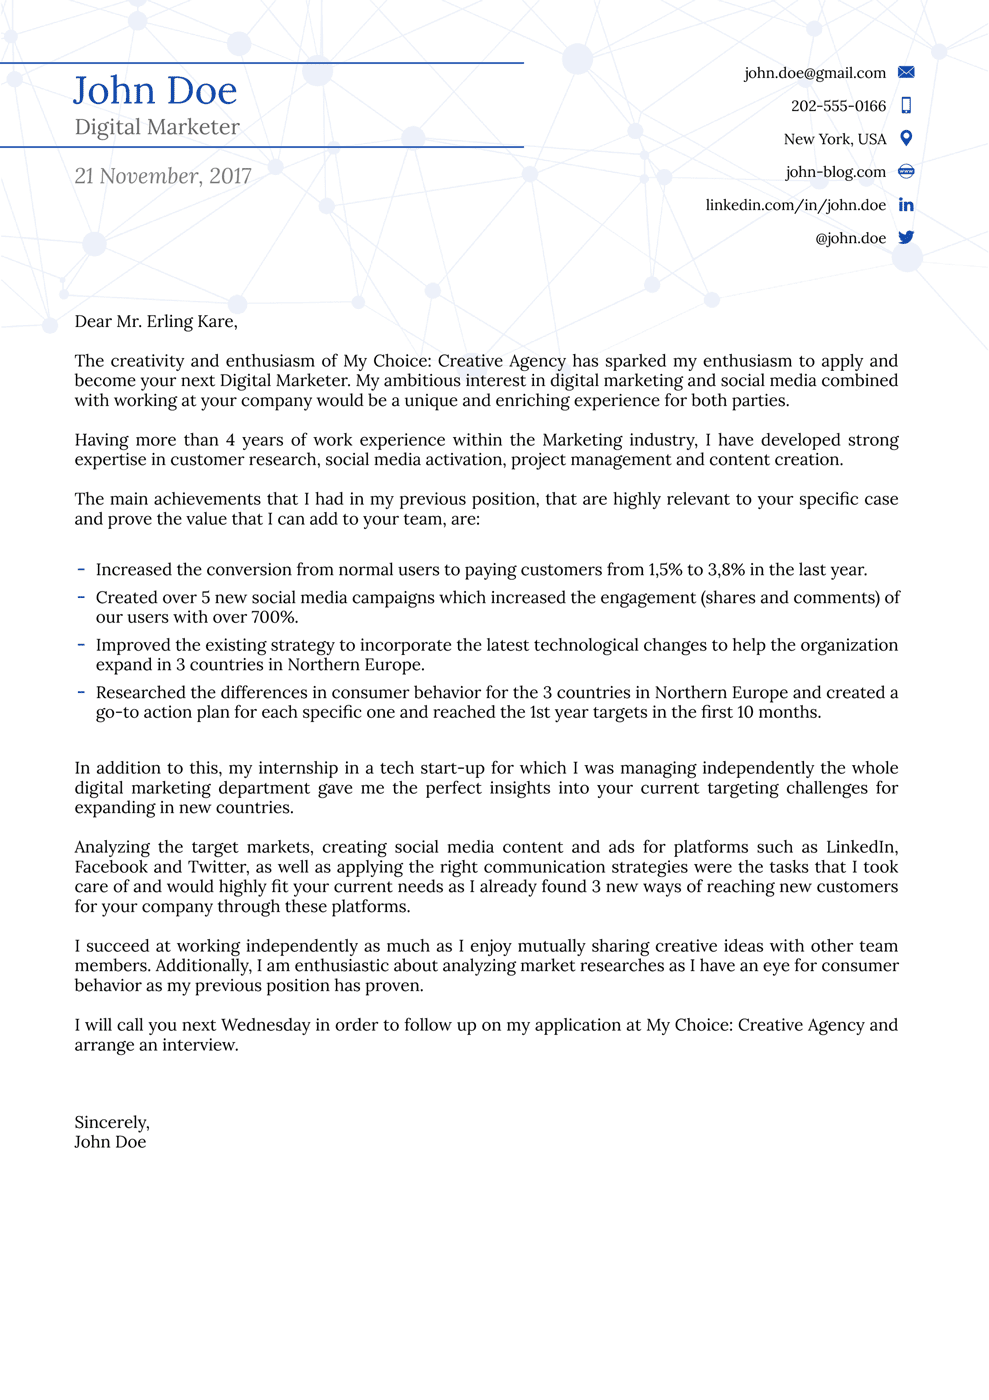 College Admissions Cover Letter [Sample] - Request Letters